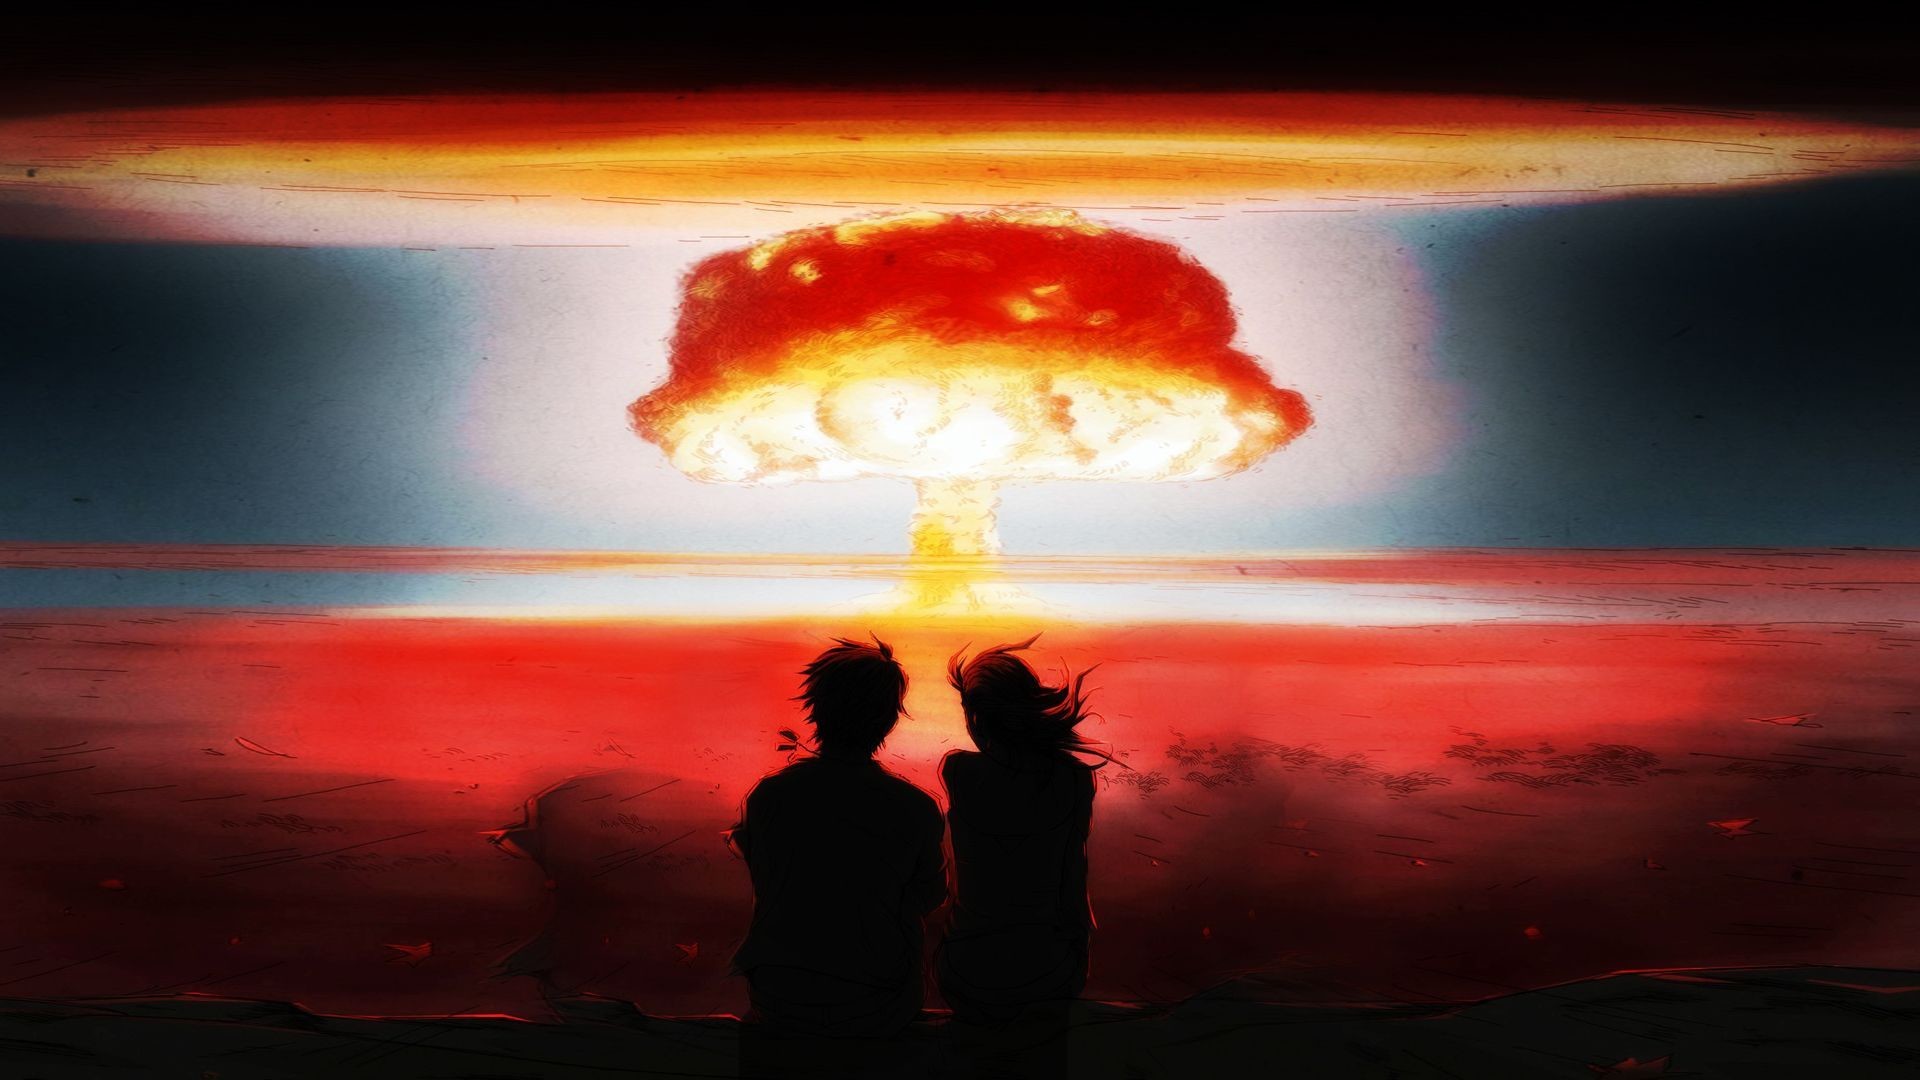 1920x1080 Watching a nuclear explosion wallpaper #17946